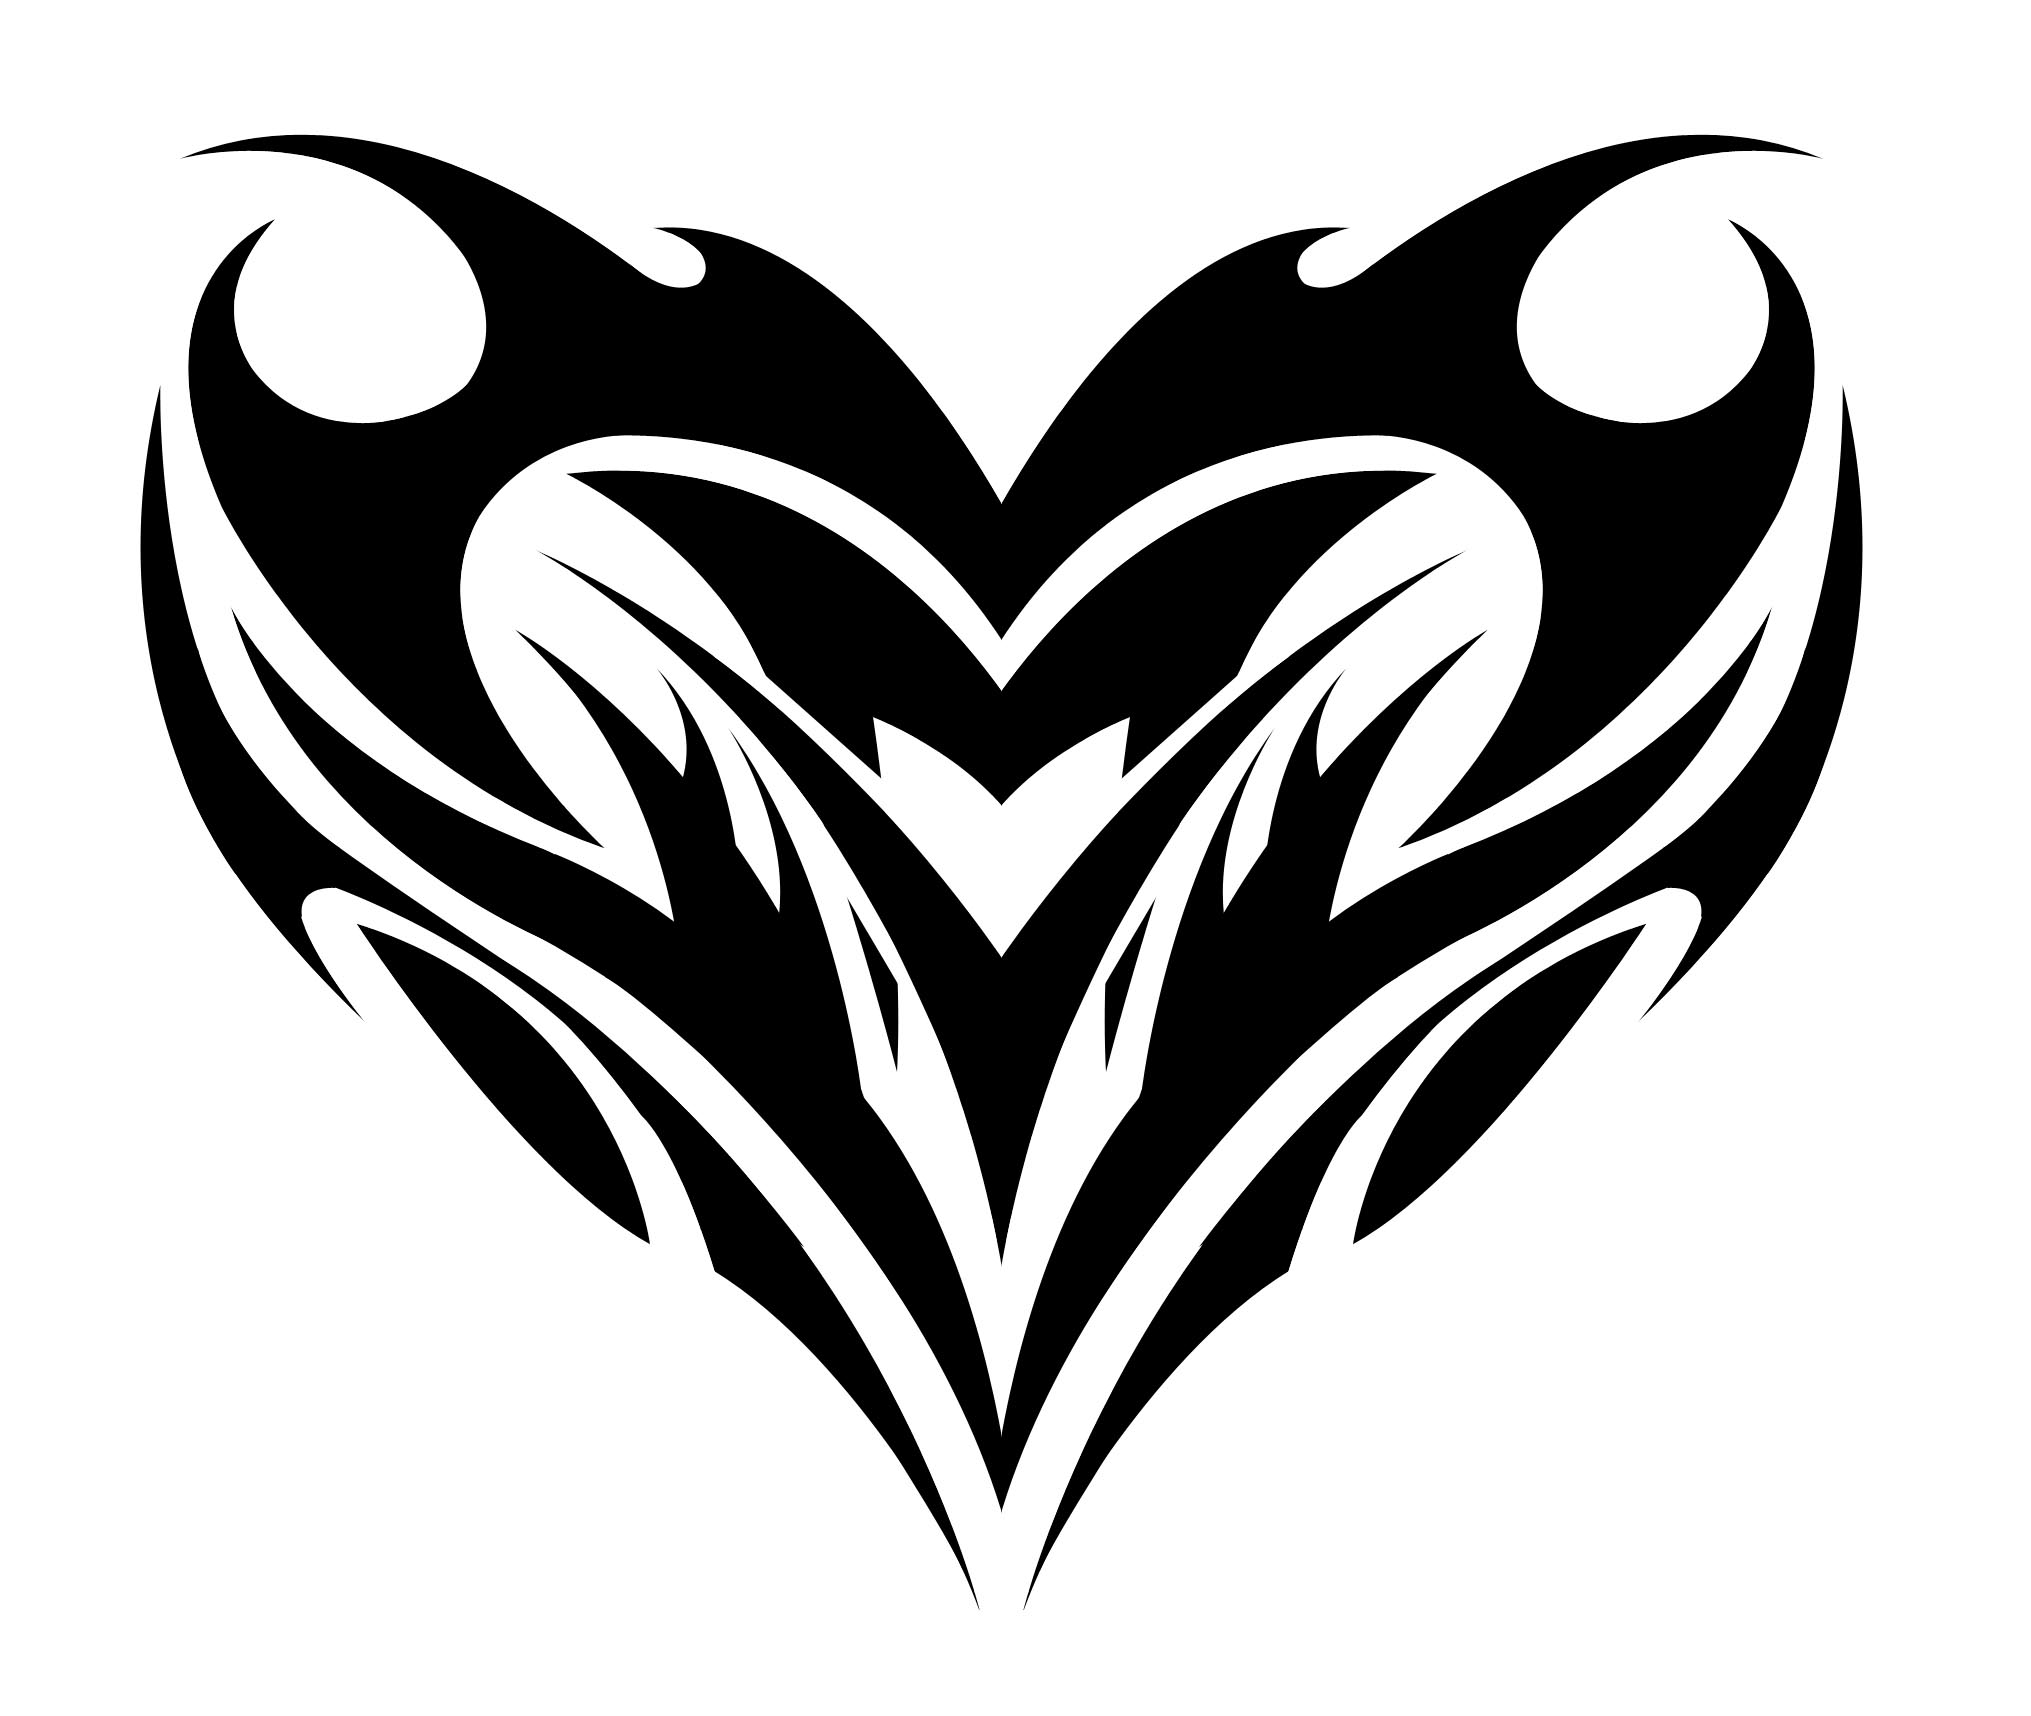 Tribal Heart Drawing - Gallery